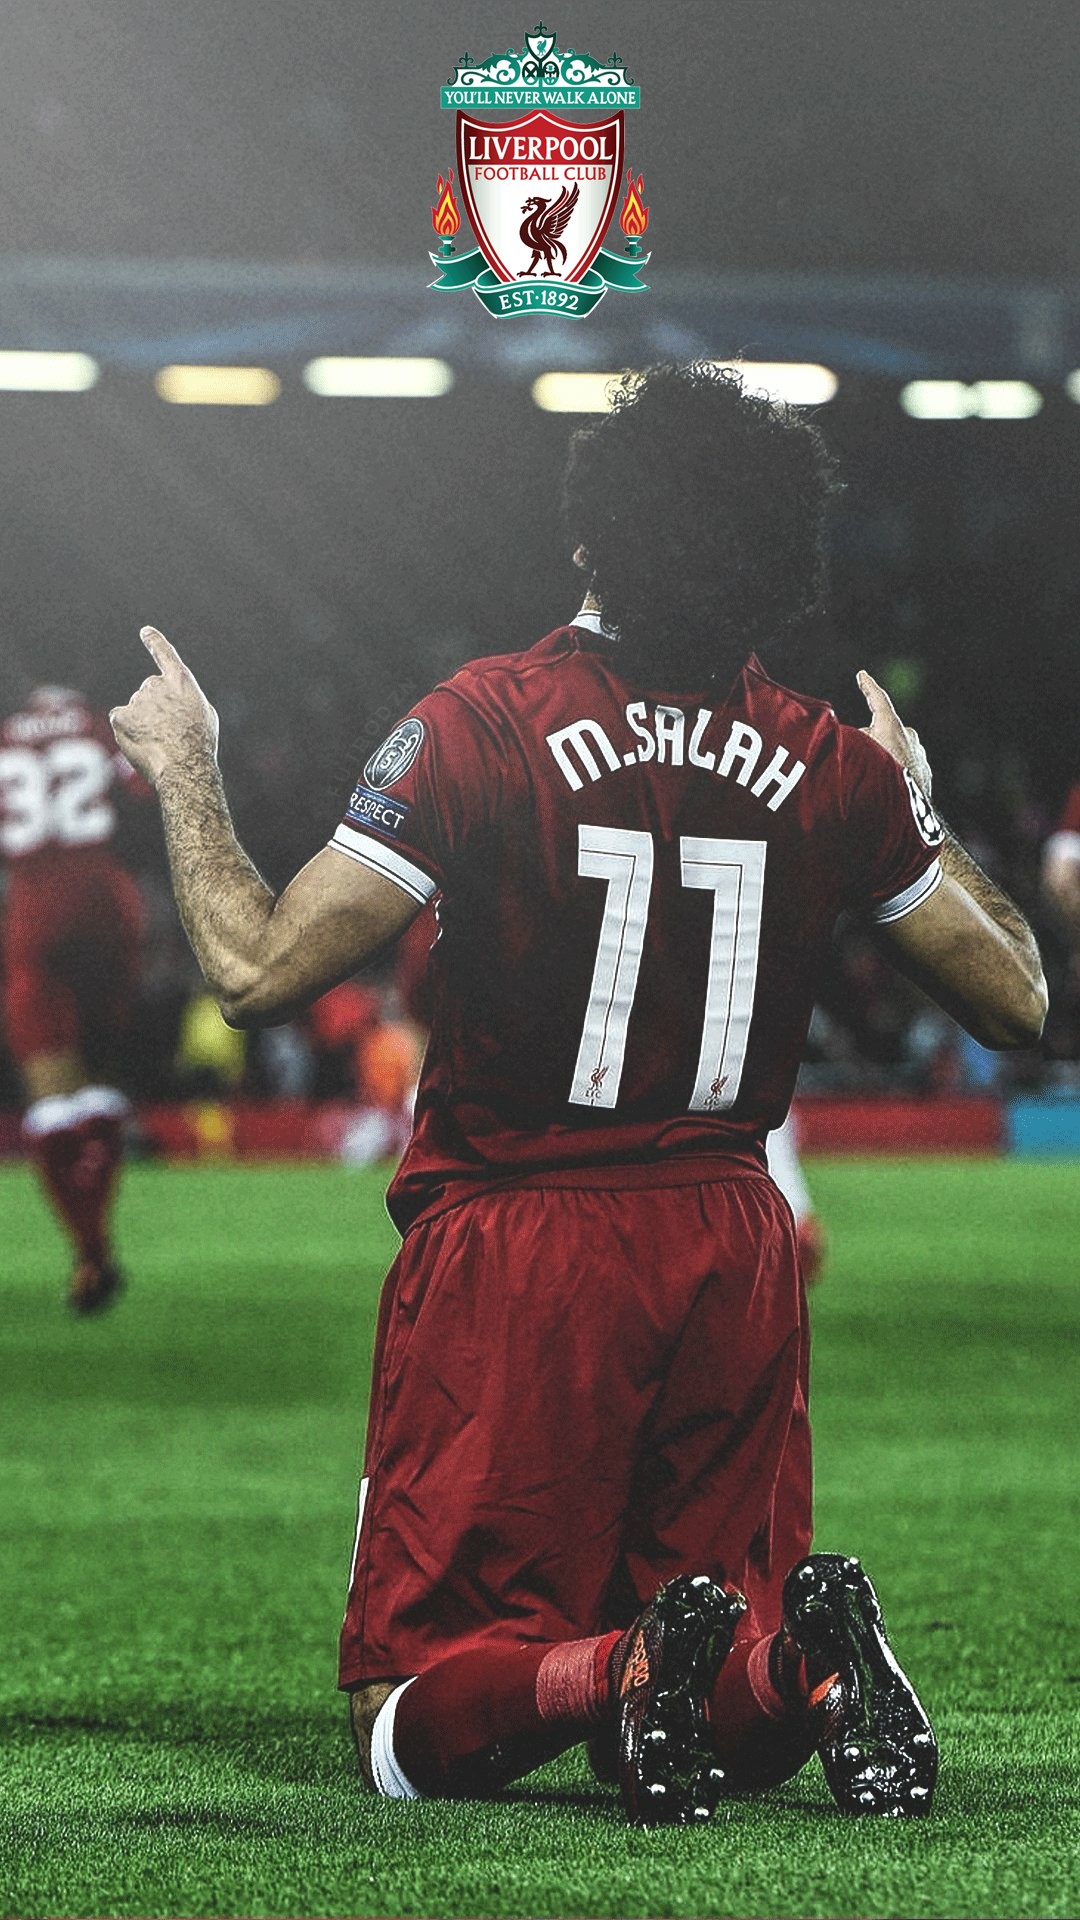 iPhone X Wallpaper Liverpool Mohamed Salah with image resolution 1080x1920 pixel. You can make this wallpaper for your iPhone 5, 6, 7, 8, X backgrounds, Mobile Screensaver, or iPad Lock Screen